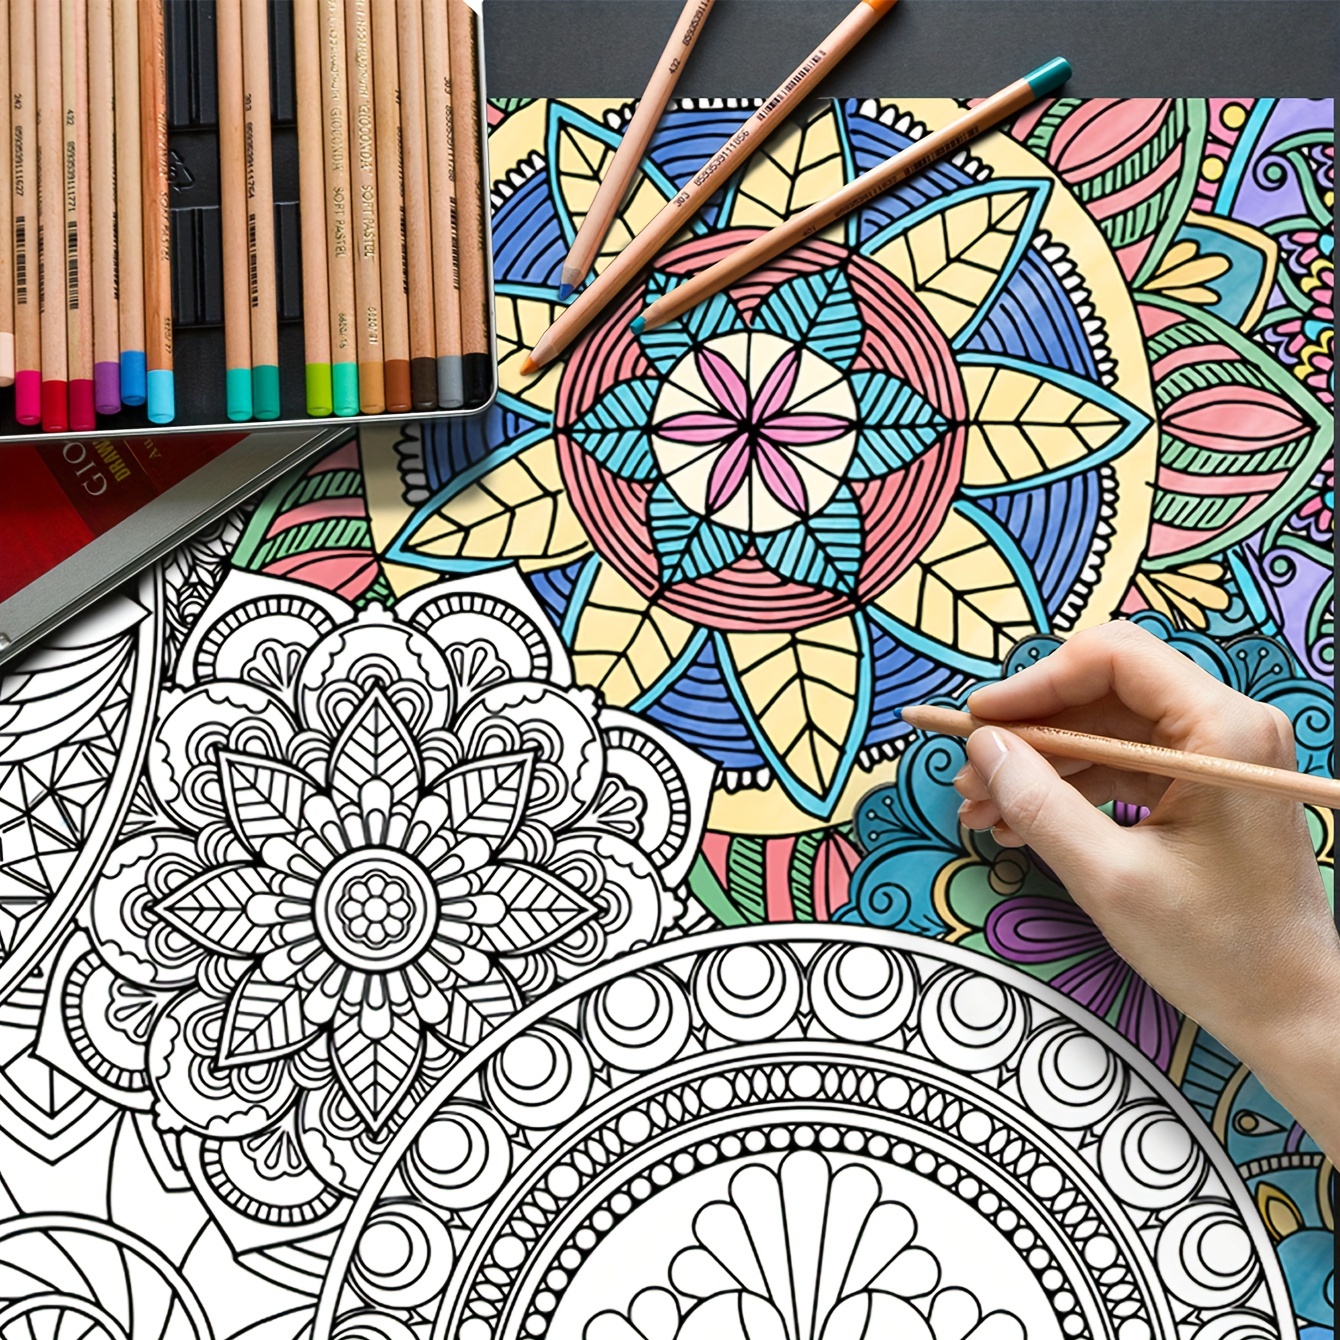  Giant Mandala Coloring Poster Jumbo Flower Drawing Paper 72 x  30 Inch Large Coloring Tablecloth for Adults kids Teens Coloring Books Bulk  Coloring Pages for Art Party Decorations Wall Craft Arts